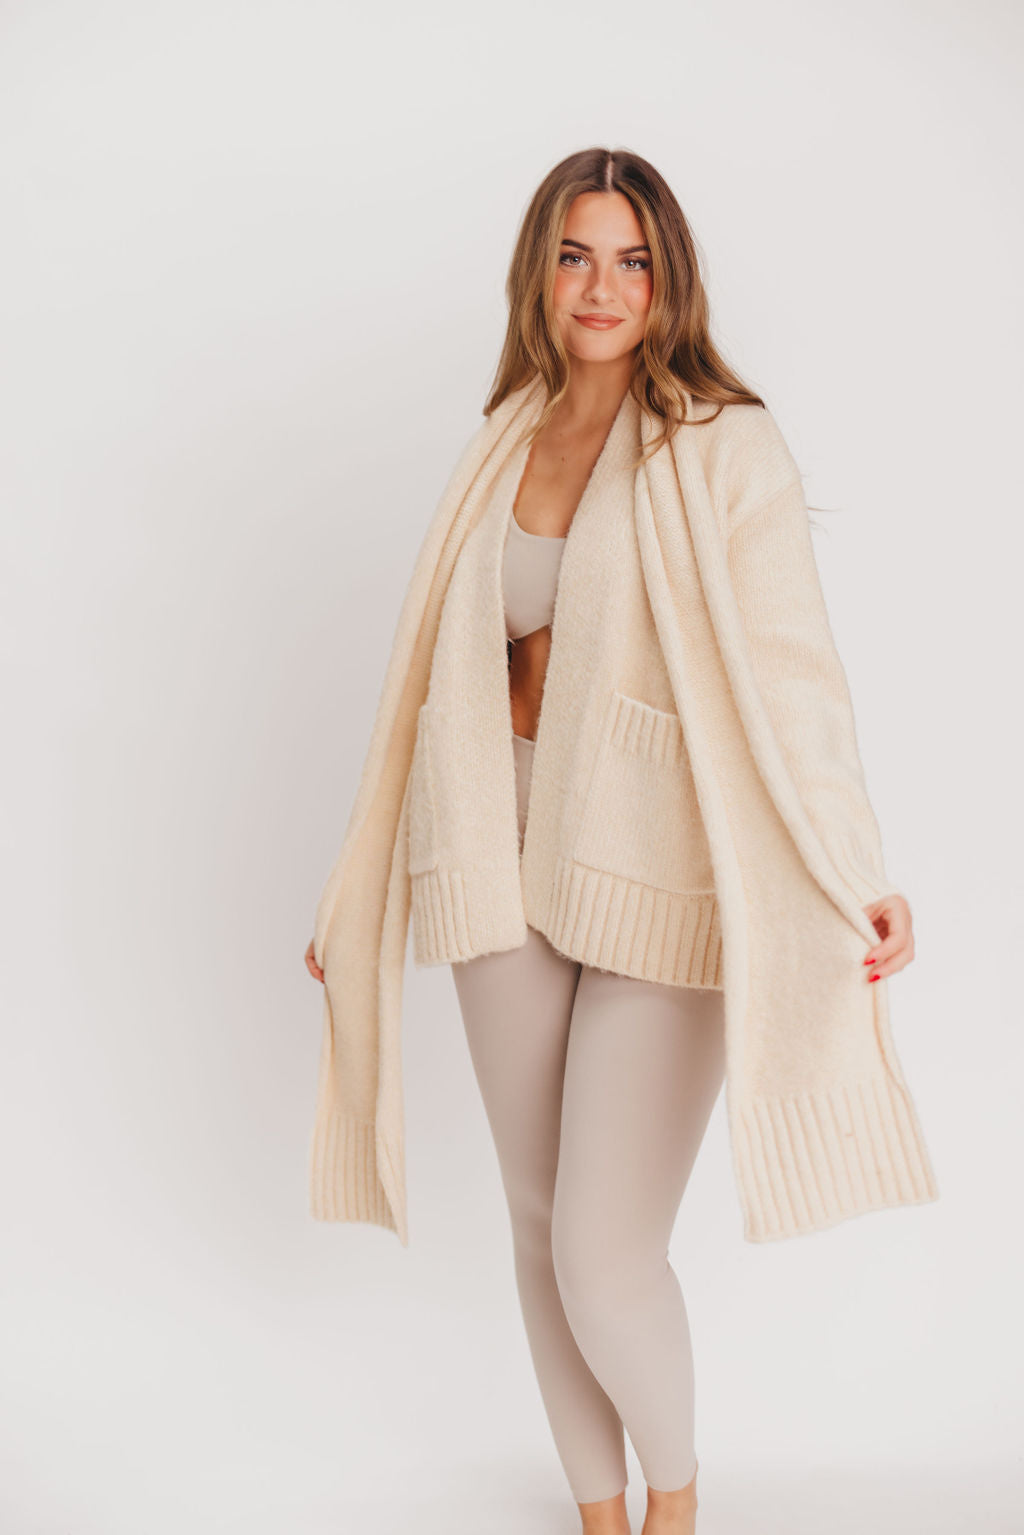 Sammy Knit Cardigan with Attached Scarf in Butter